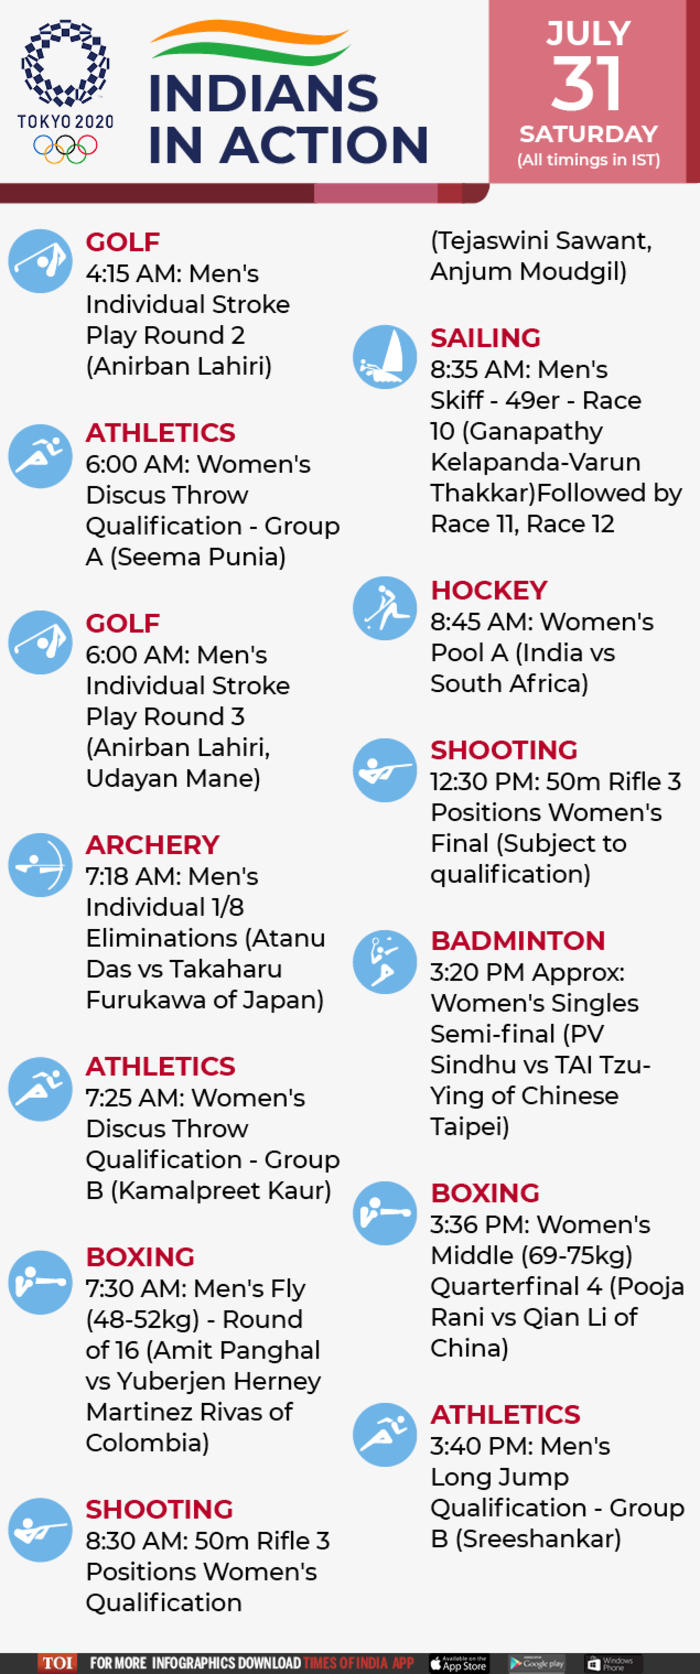 The singles summer results at and schedule – badminton olympics